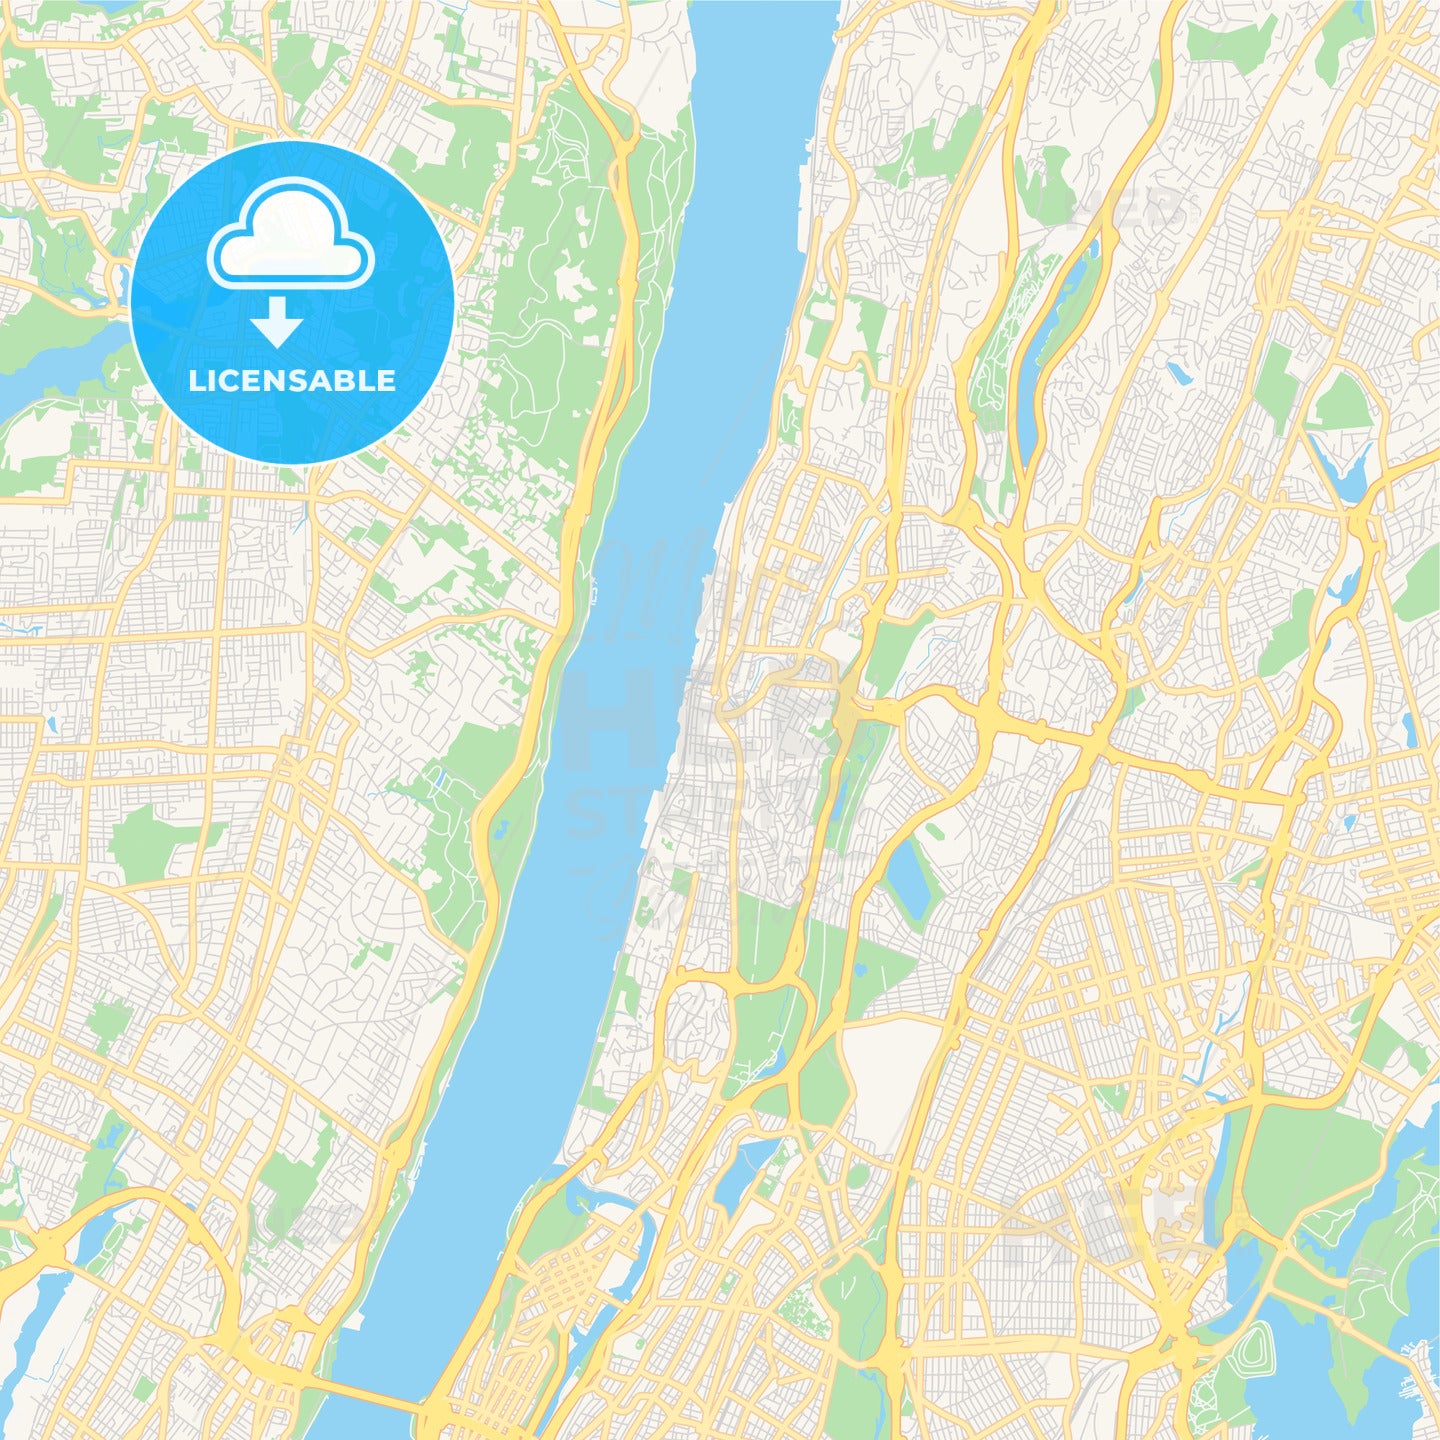 Empty vector map of Yonkers, New York, USA